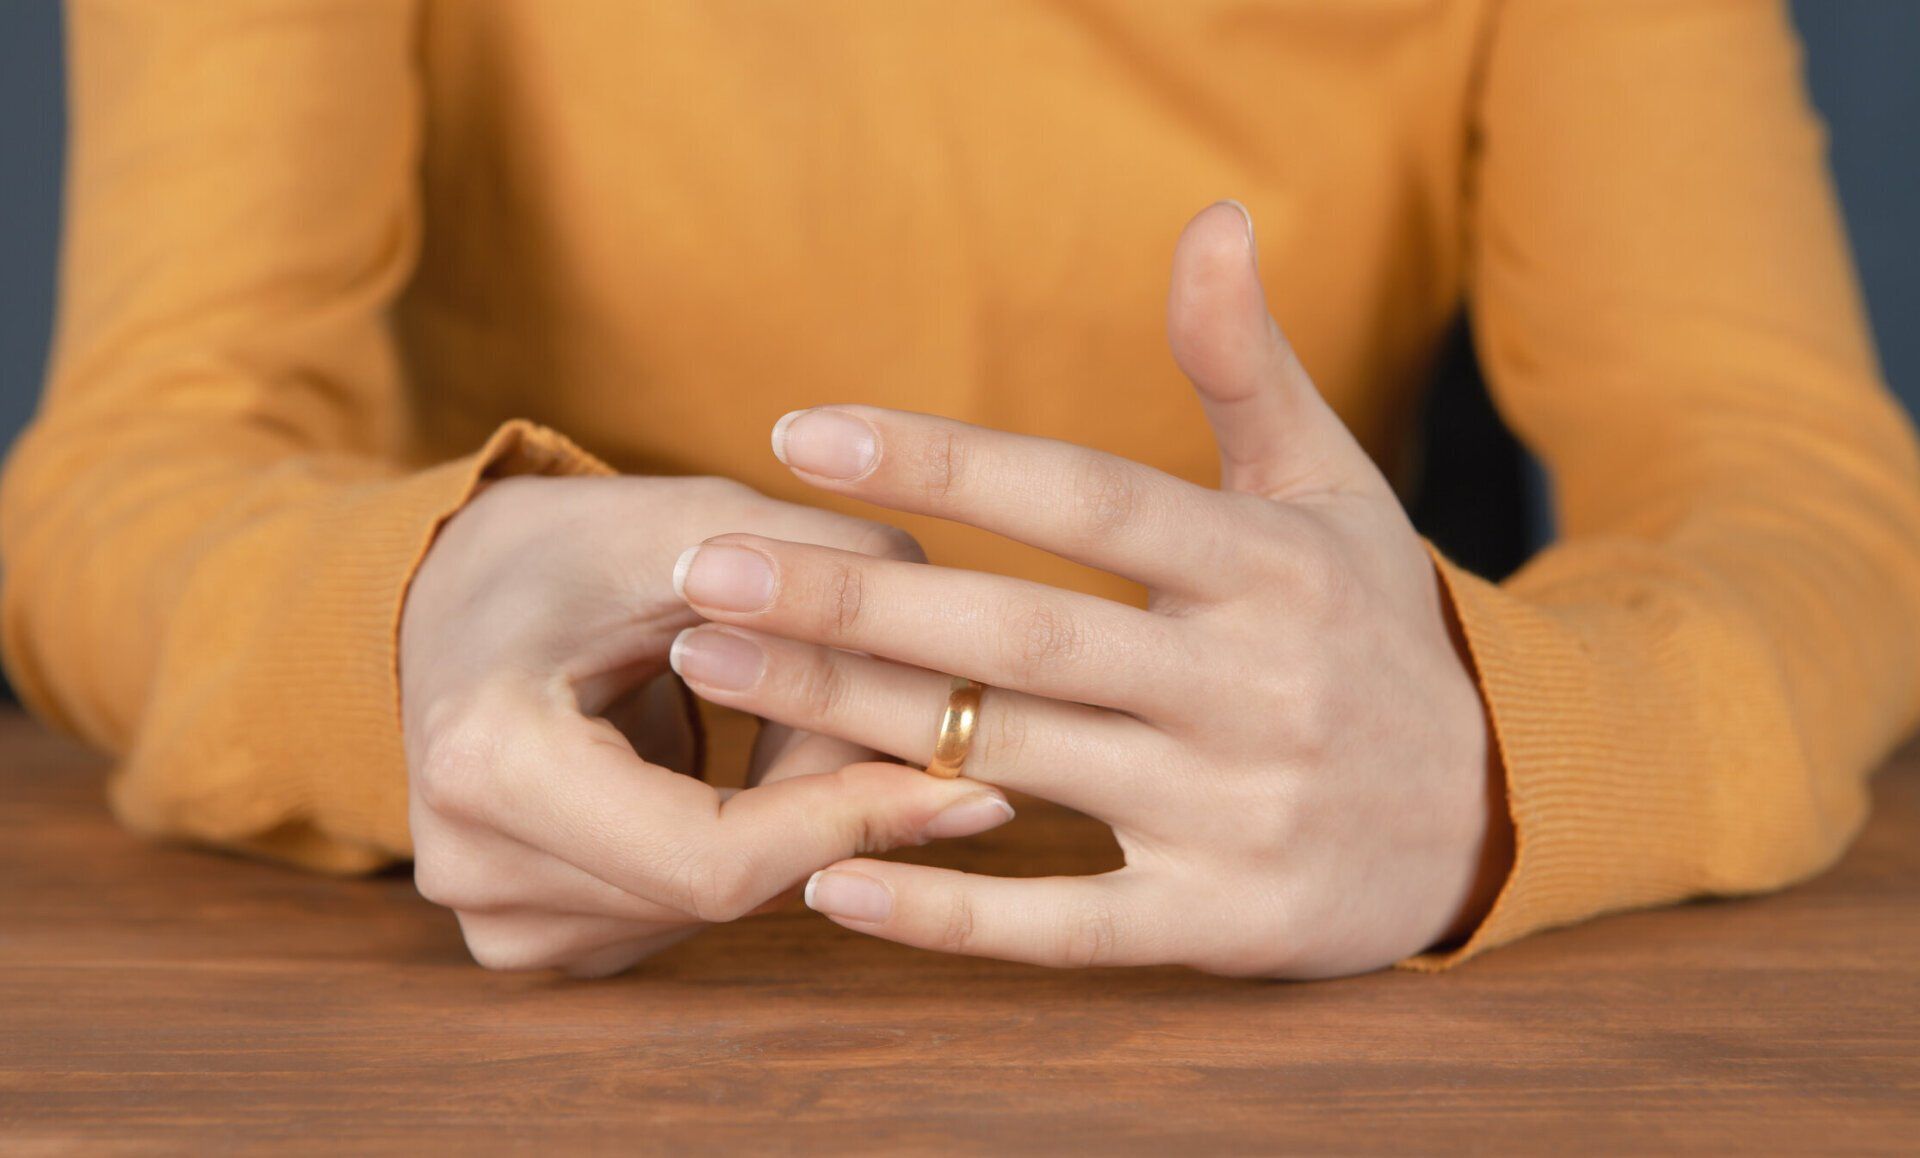 Person Removing Her Wedding Ring - Duncan, OK - The Kanehl Law Firm P.L.L.C.